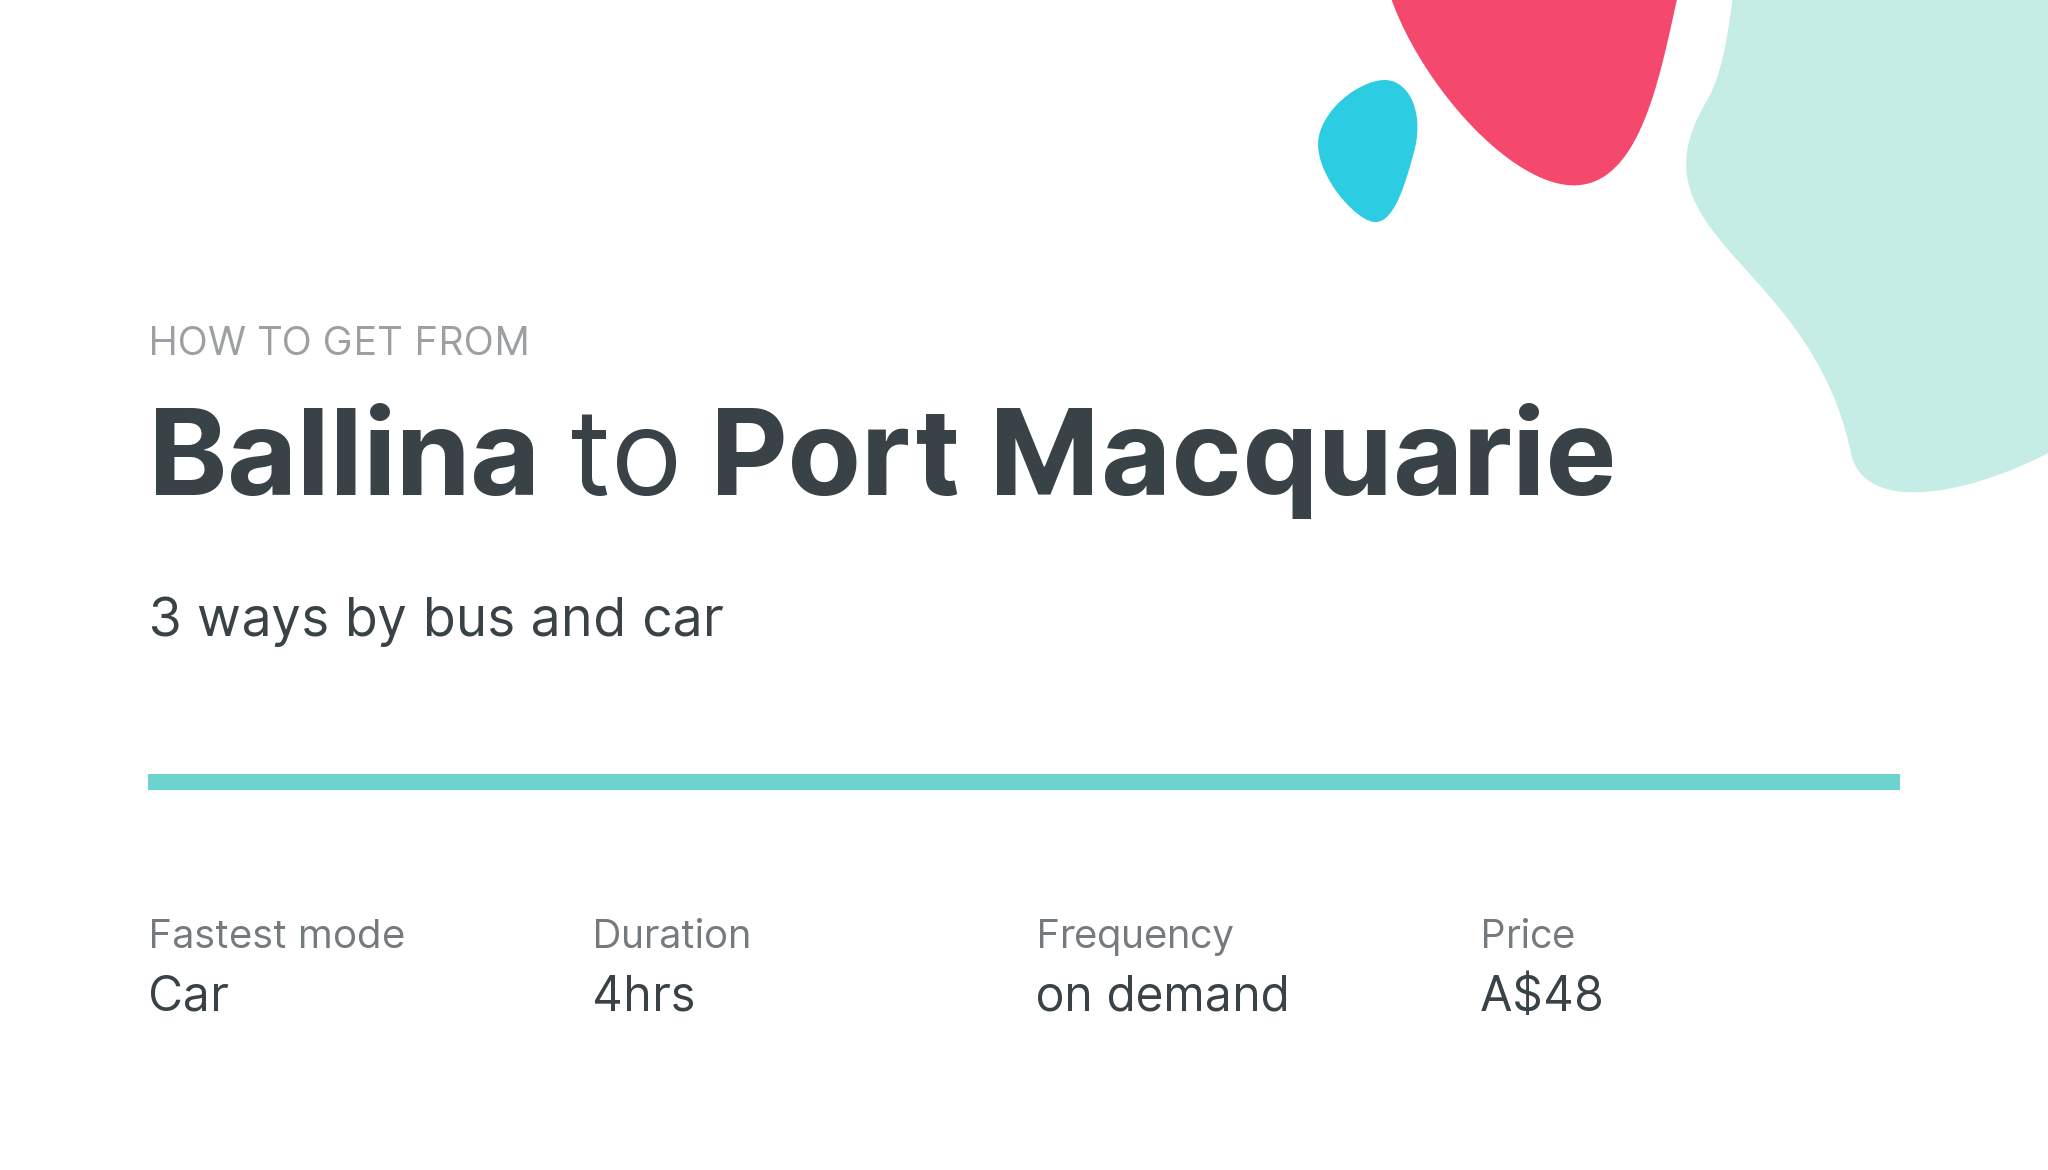 How do I get from Ballina to Port Macquarie